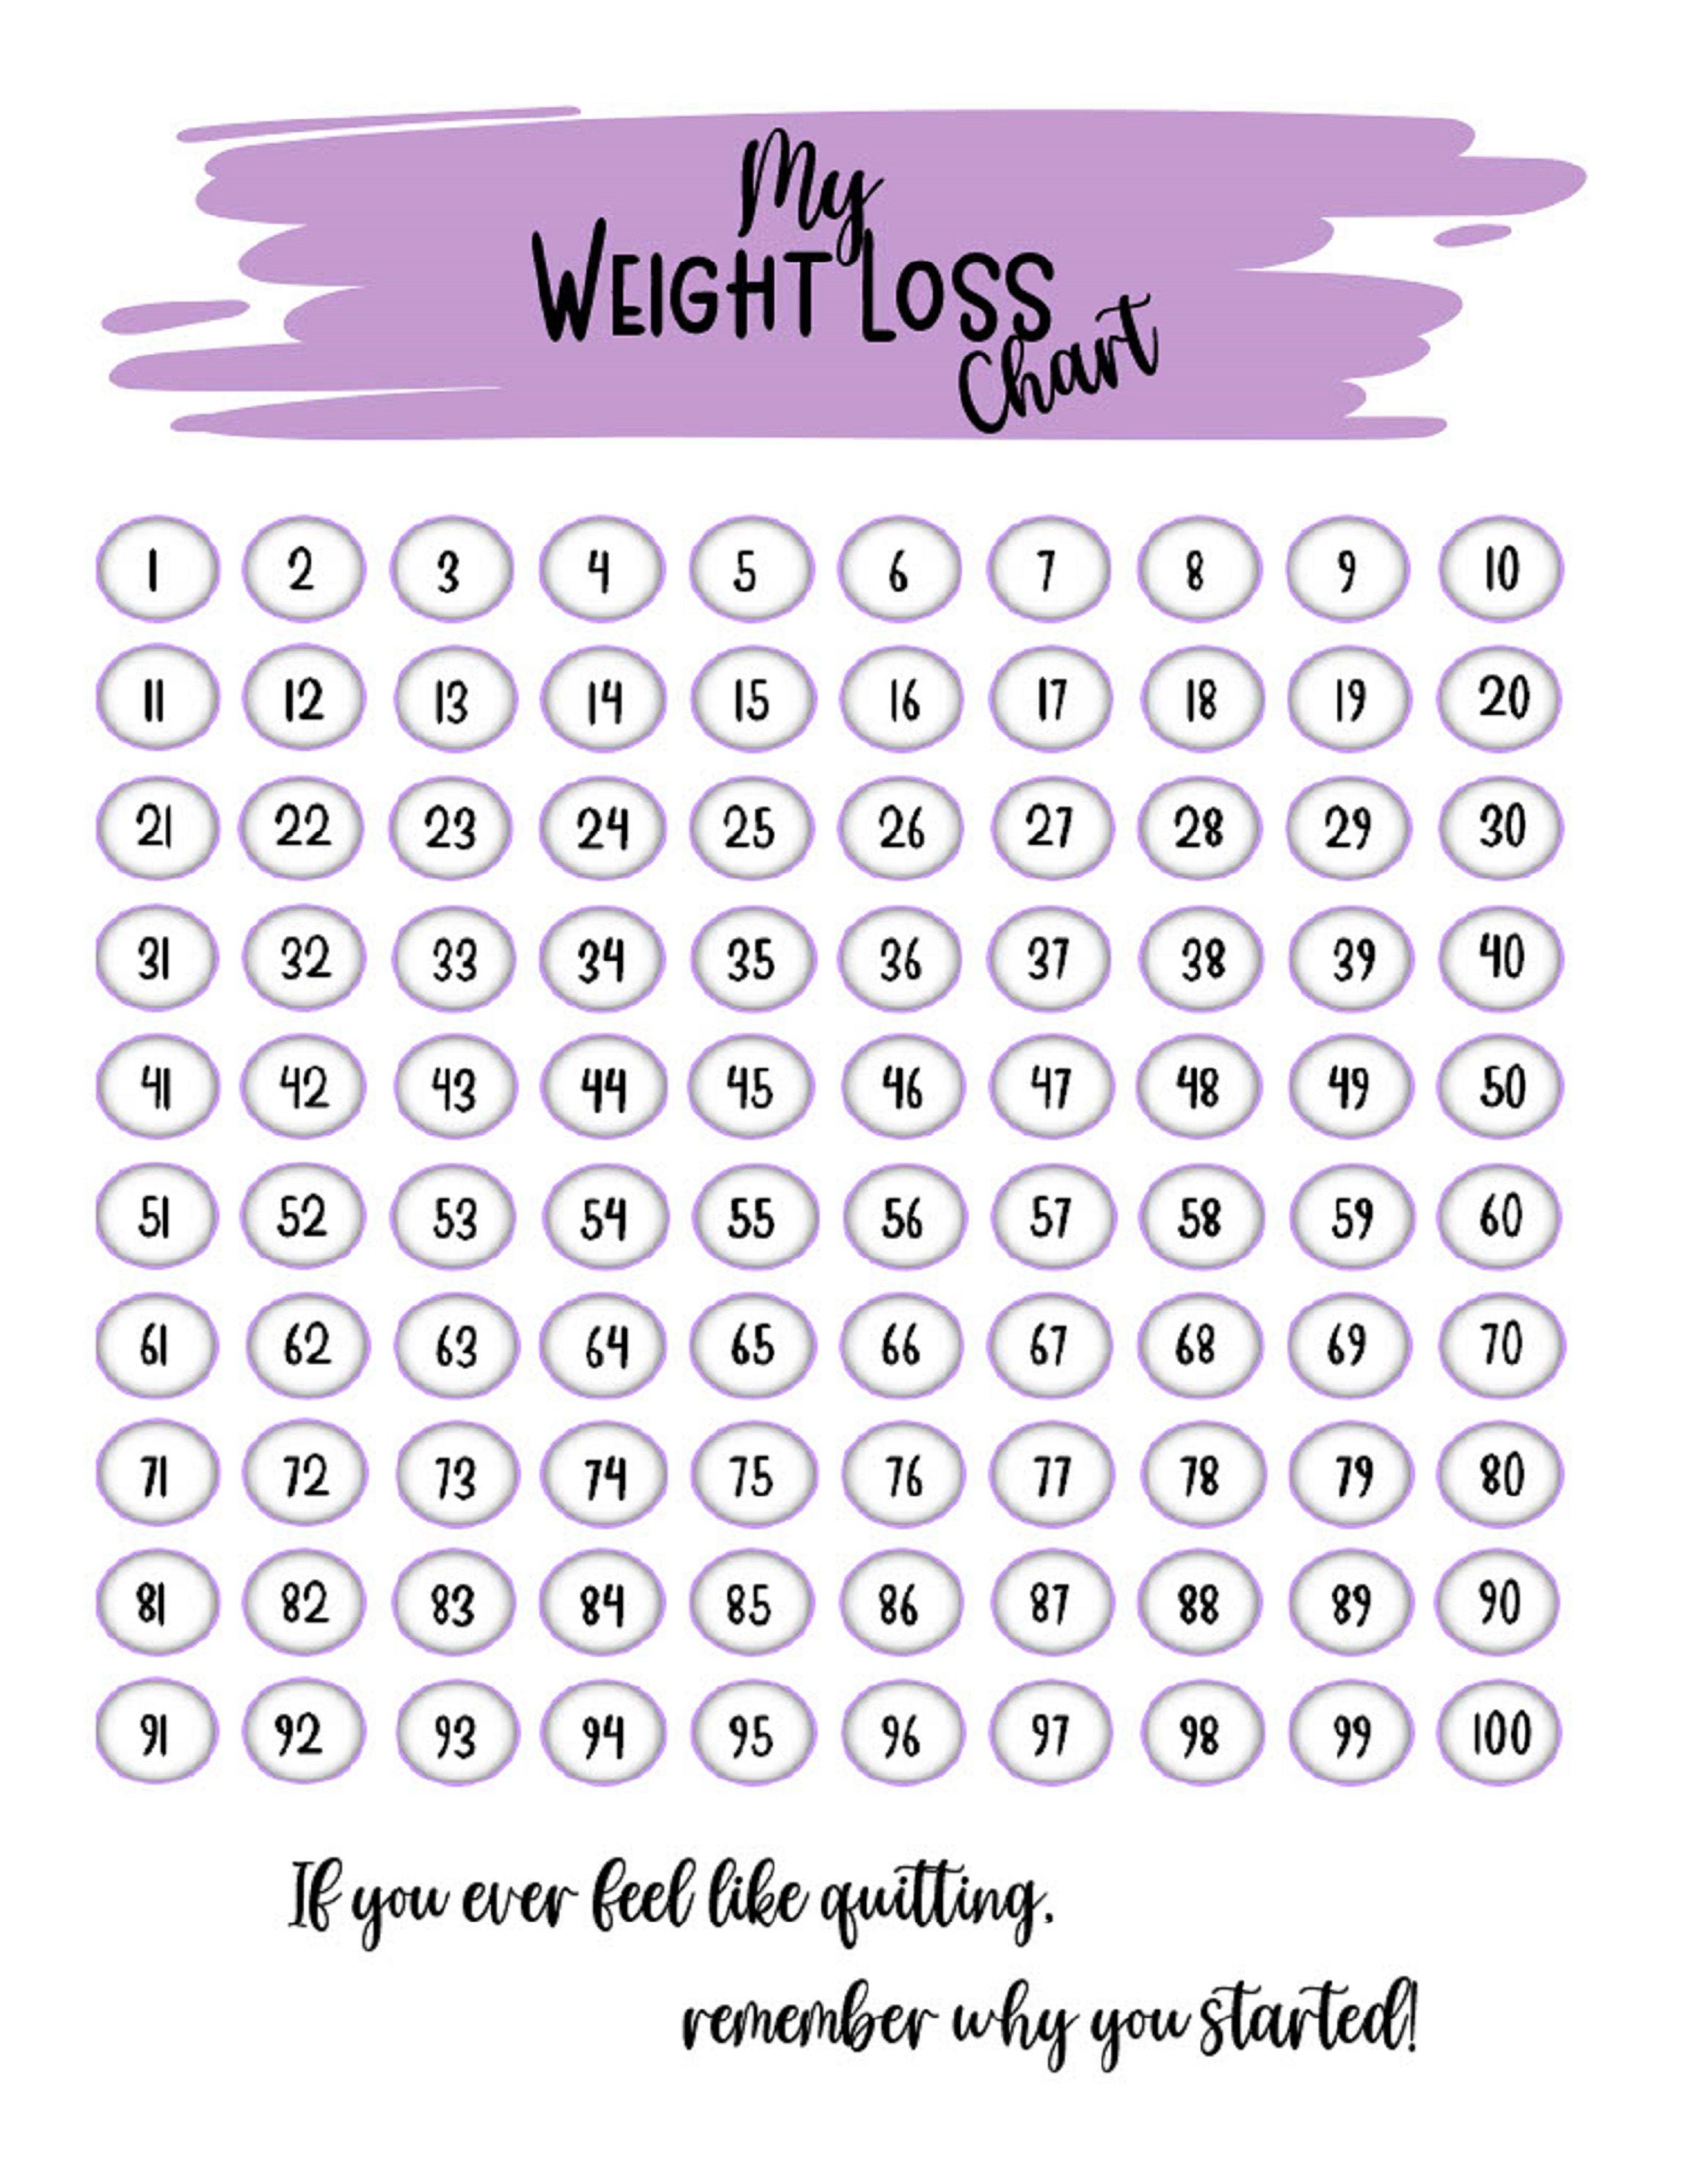 Weight Loss Chart Weight Loss Tracker Pounds Lost Chart 100 Etsy